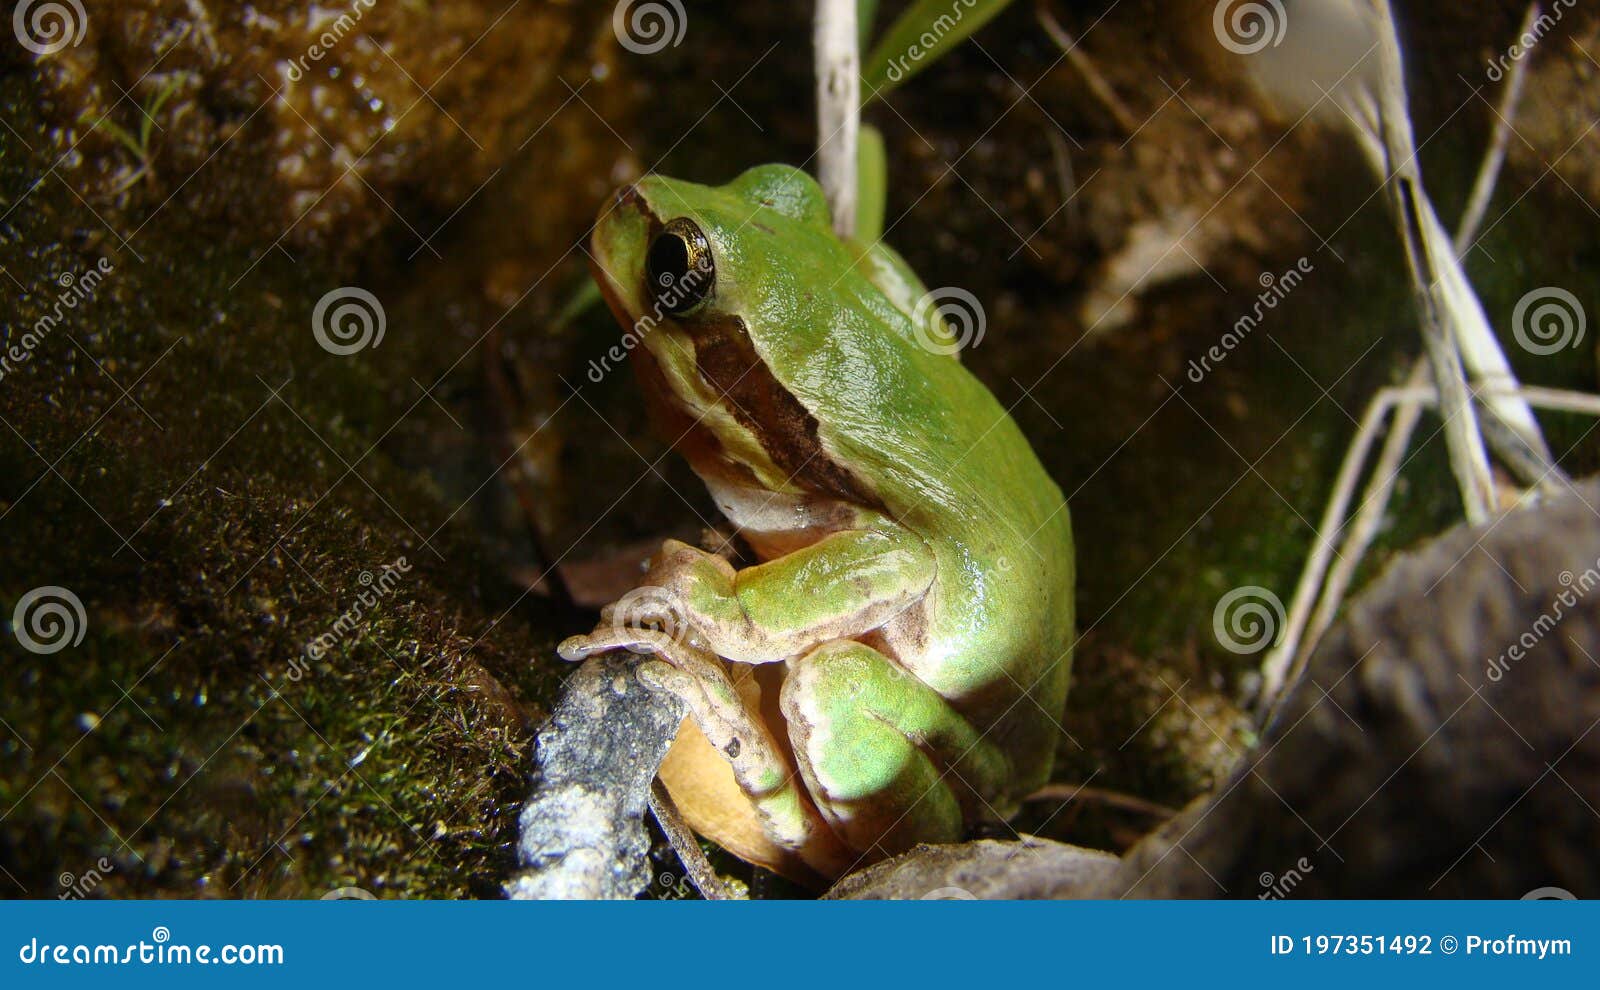 frog in the nature green tree frog in the swamp at night close up of frog chirp closeup of frog sing cute animal, beautiful animal